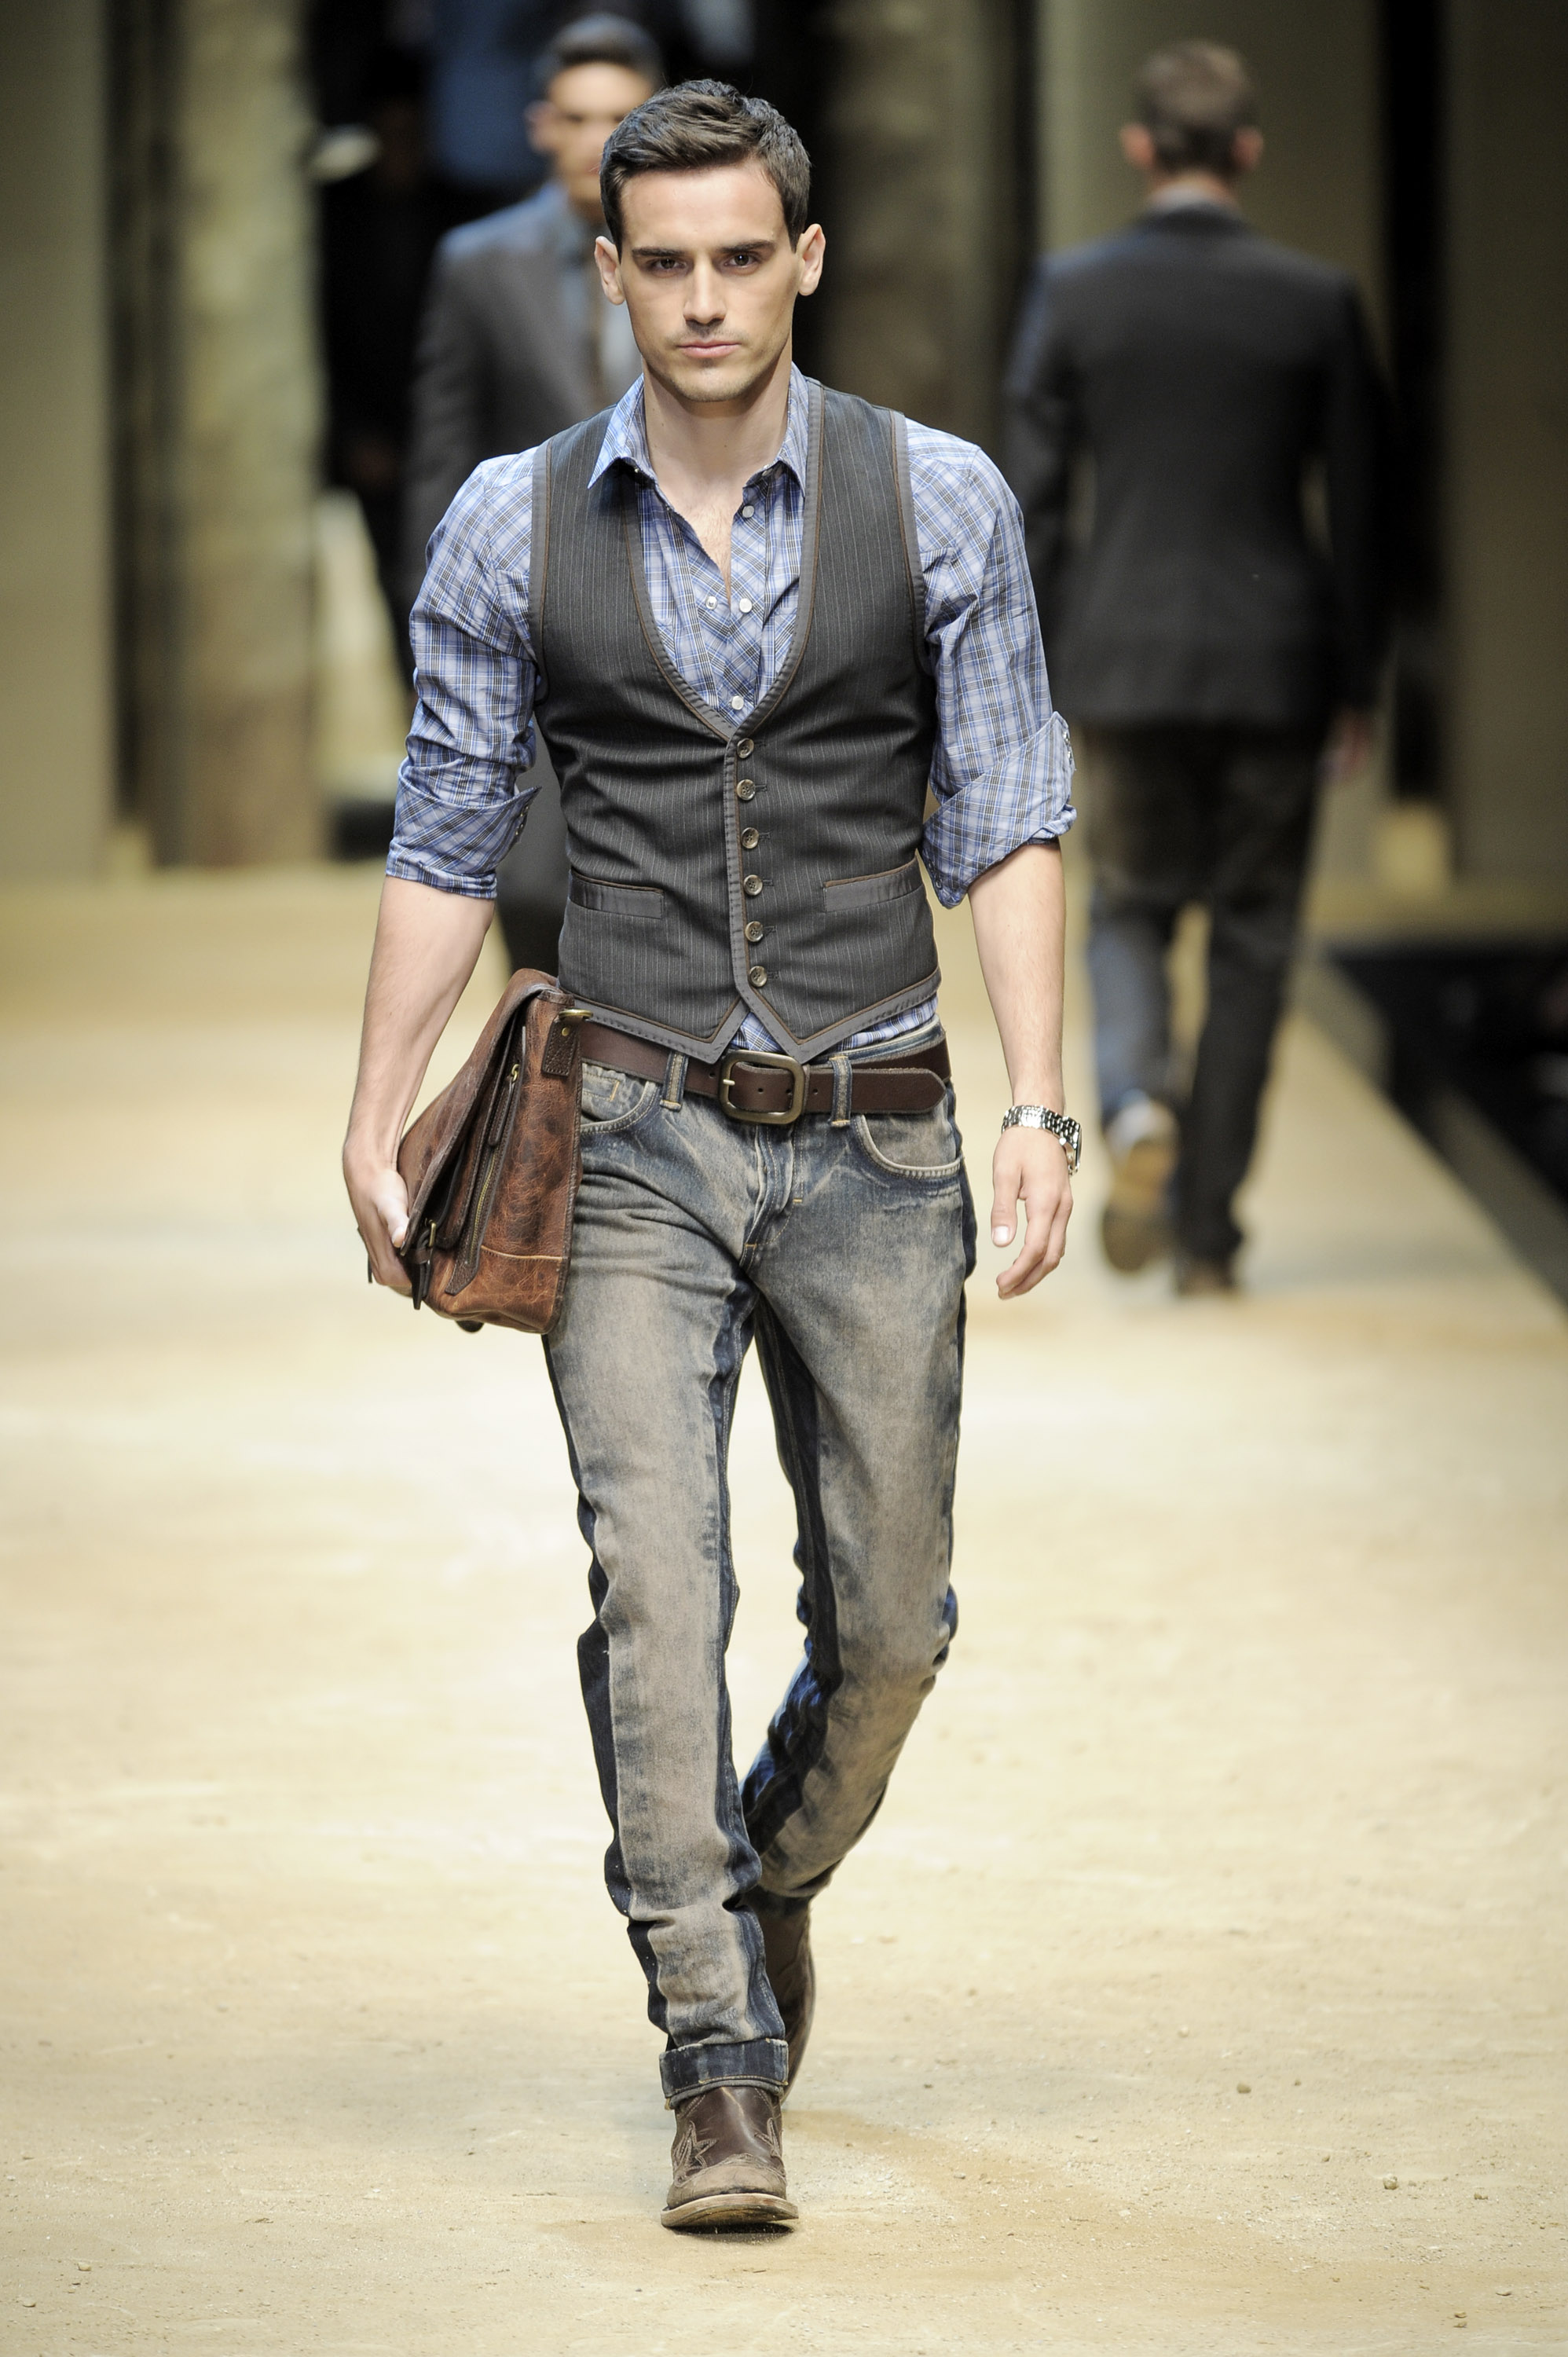 Men's Casual Fashion - Time For Change - Ohh My My